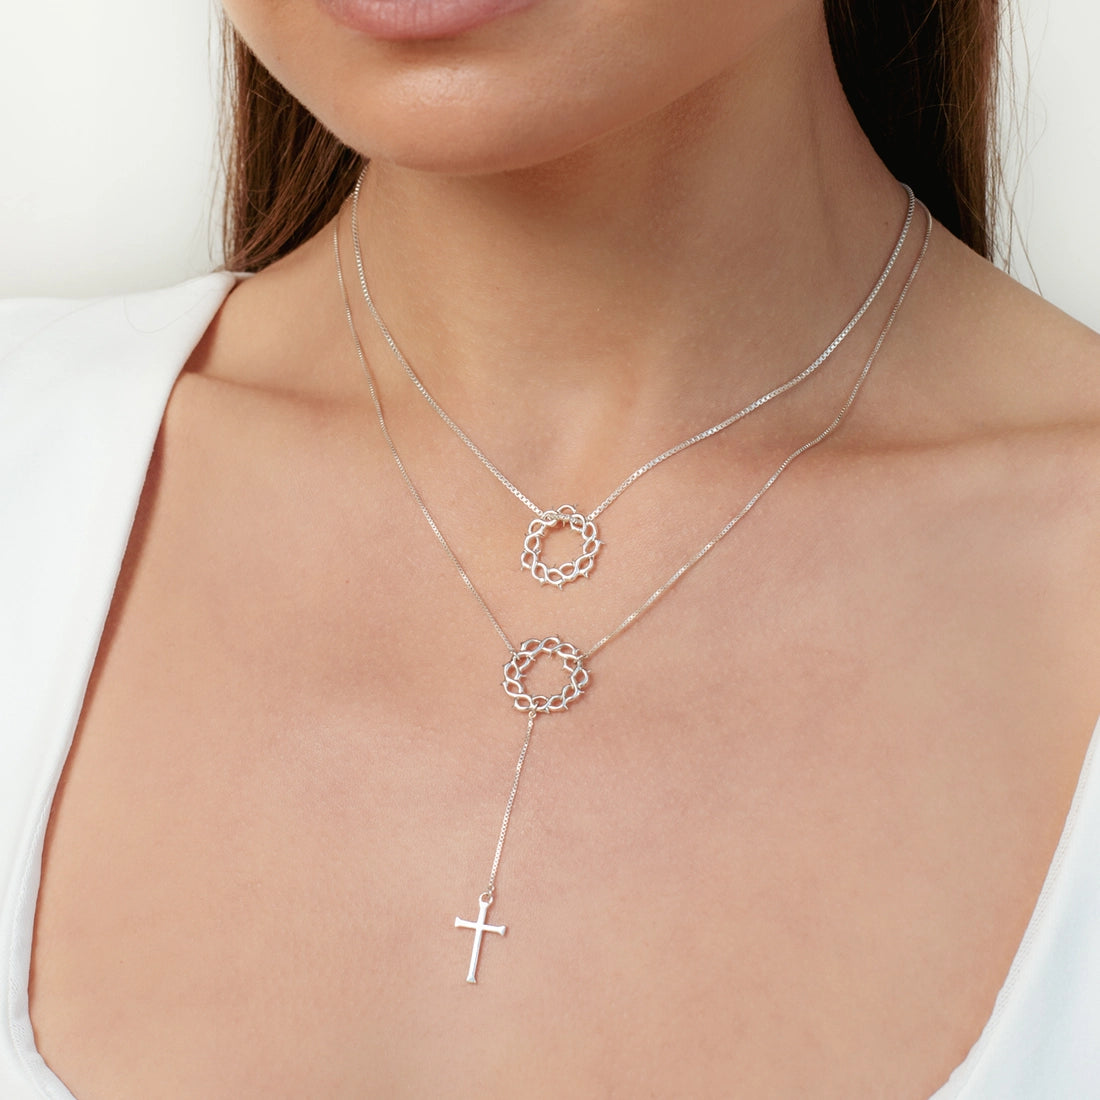 Christian woman wearing 2 Crown of Thorns Necklaces with a cross pendant in sterling silver from the Insignia Collection by Rizen Jewelry.